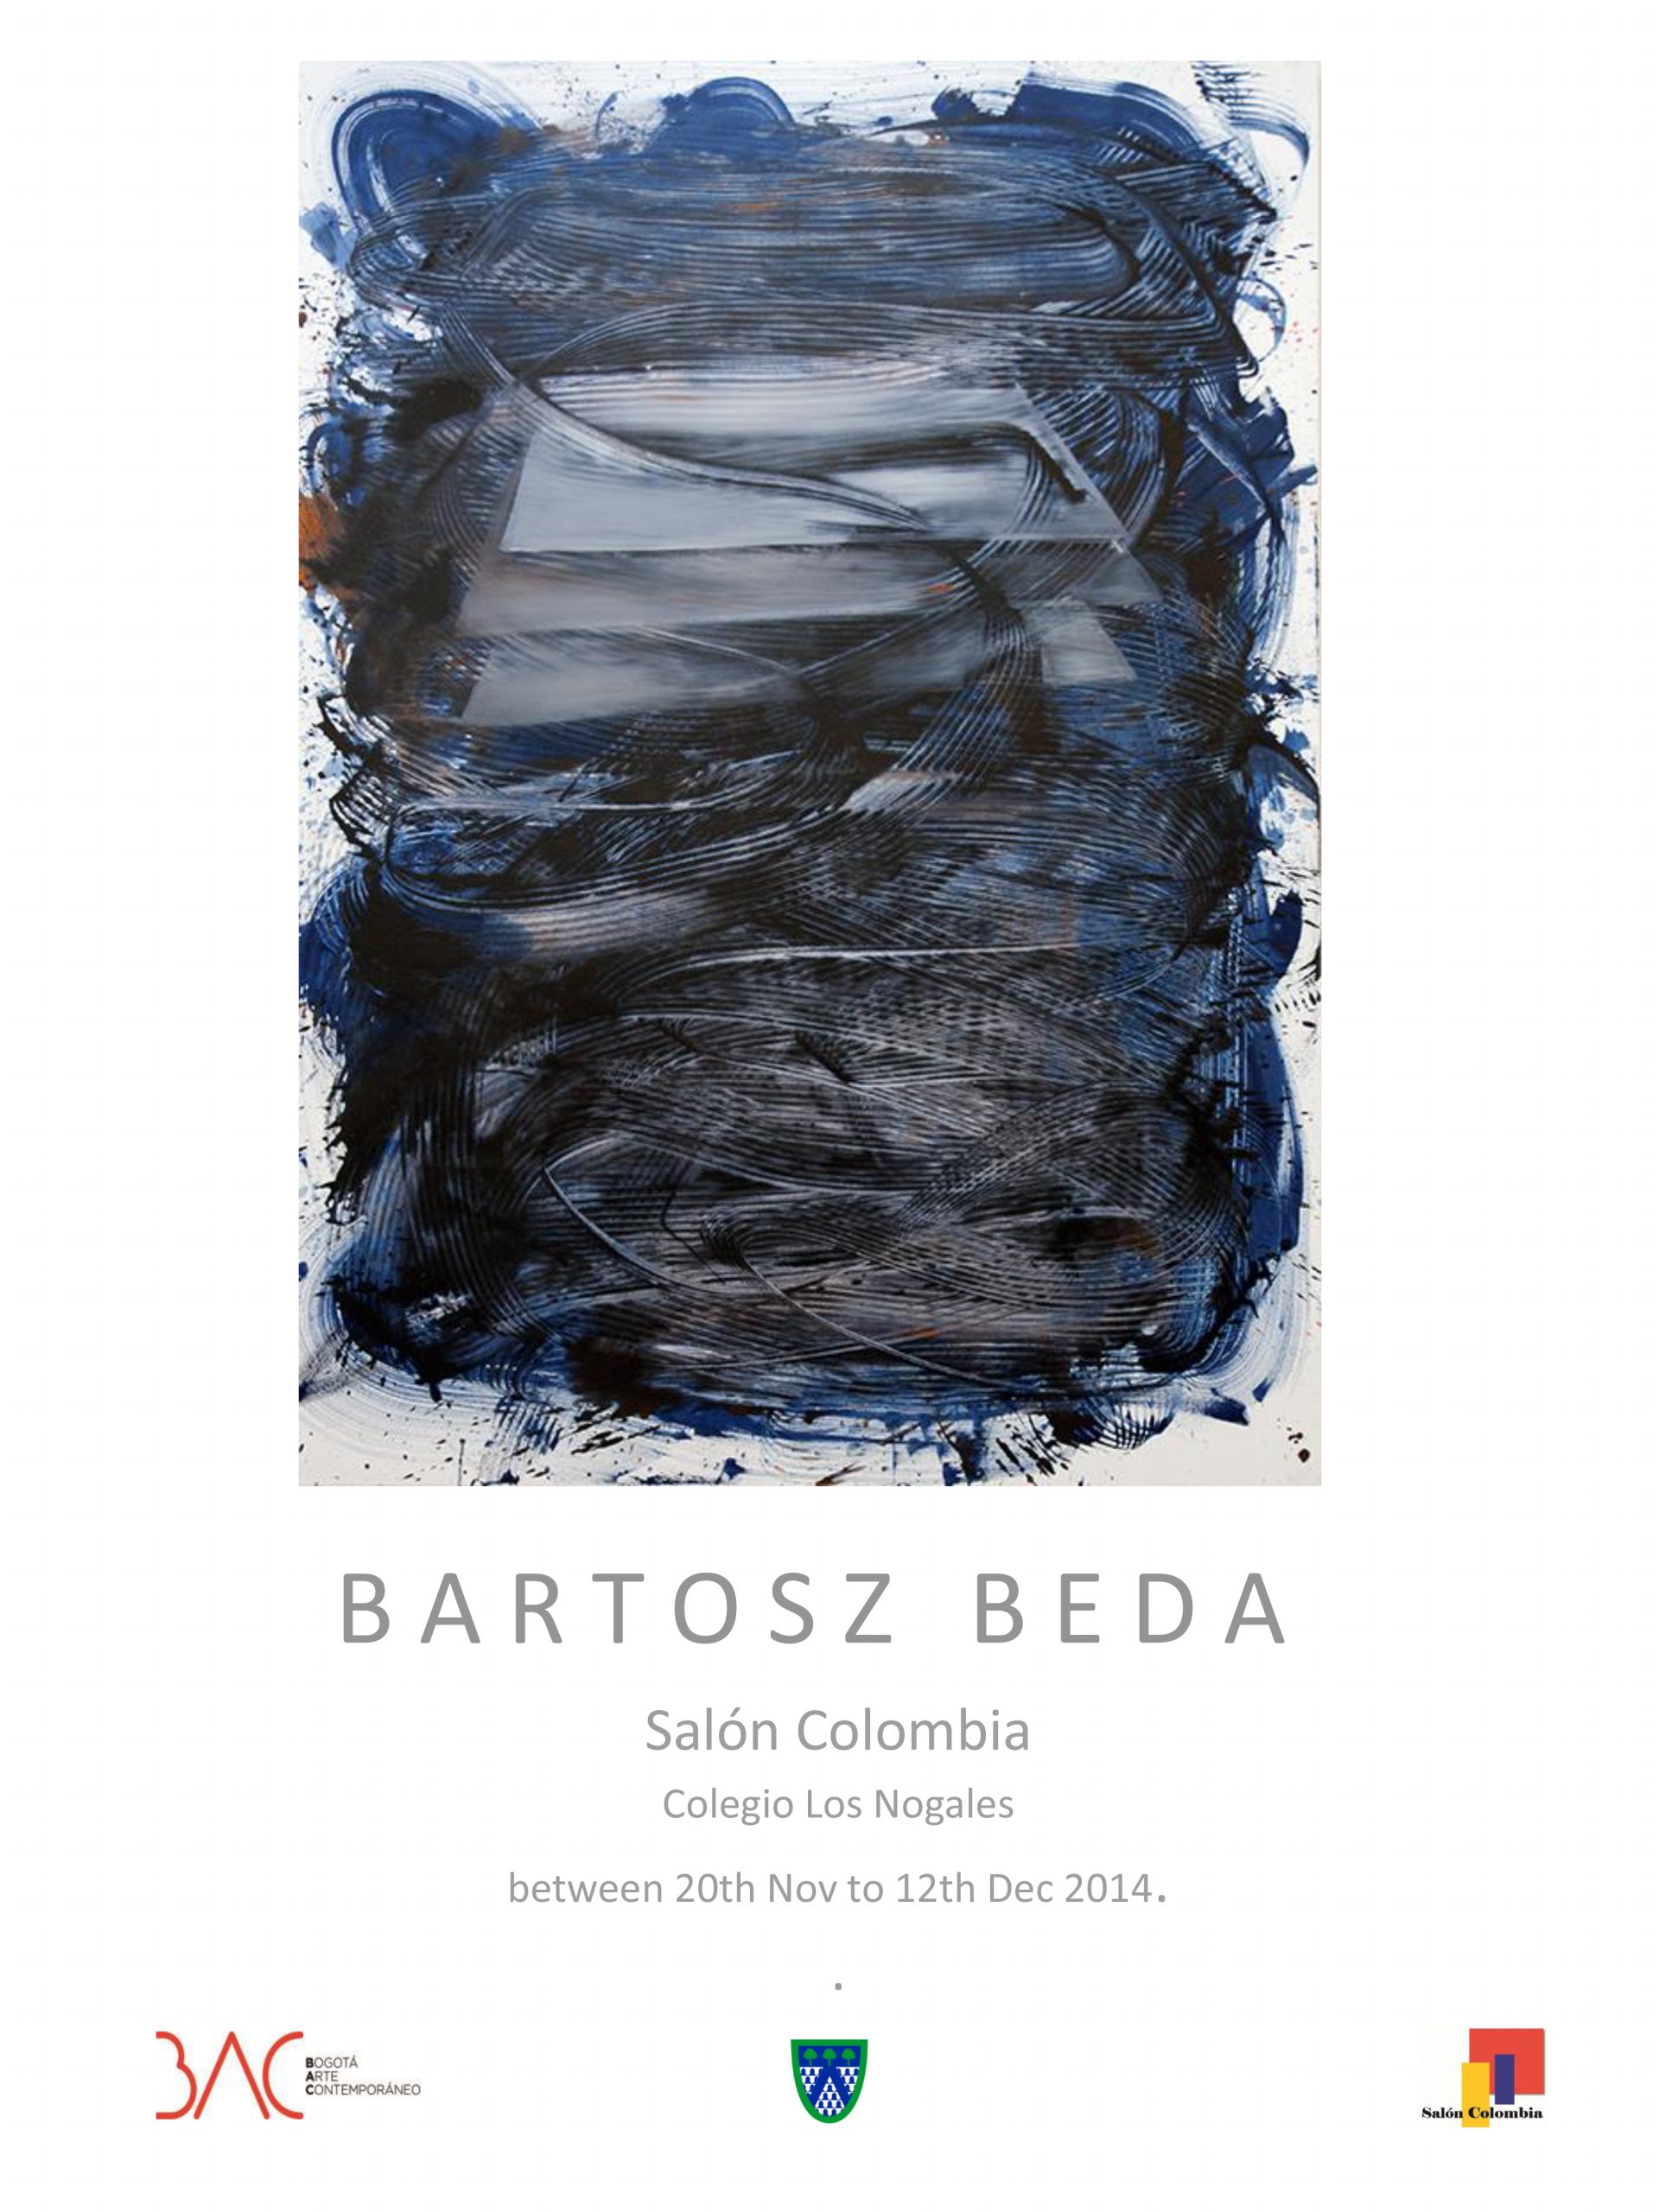 Revision of Displacement, solo exhibition by Bartosz Beda